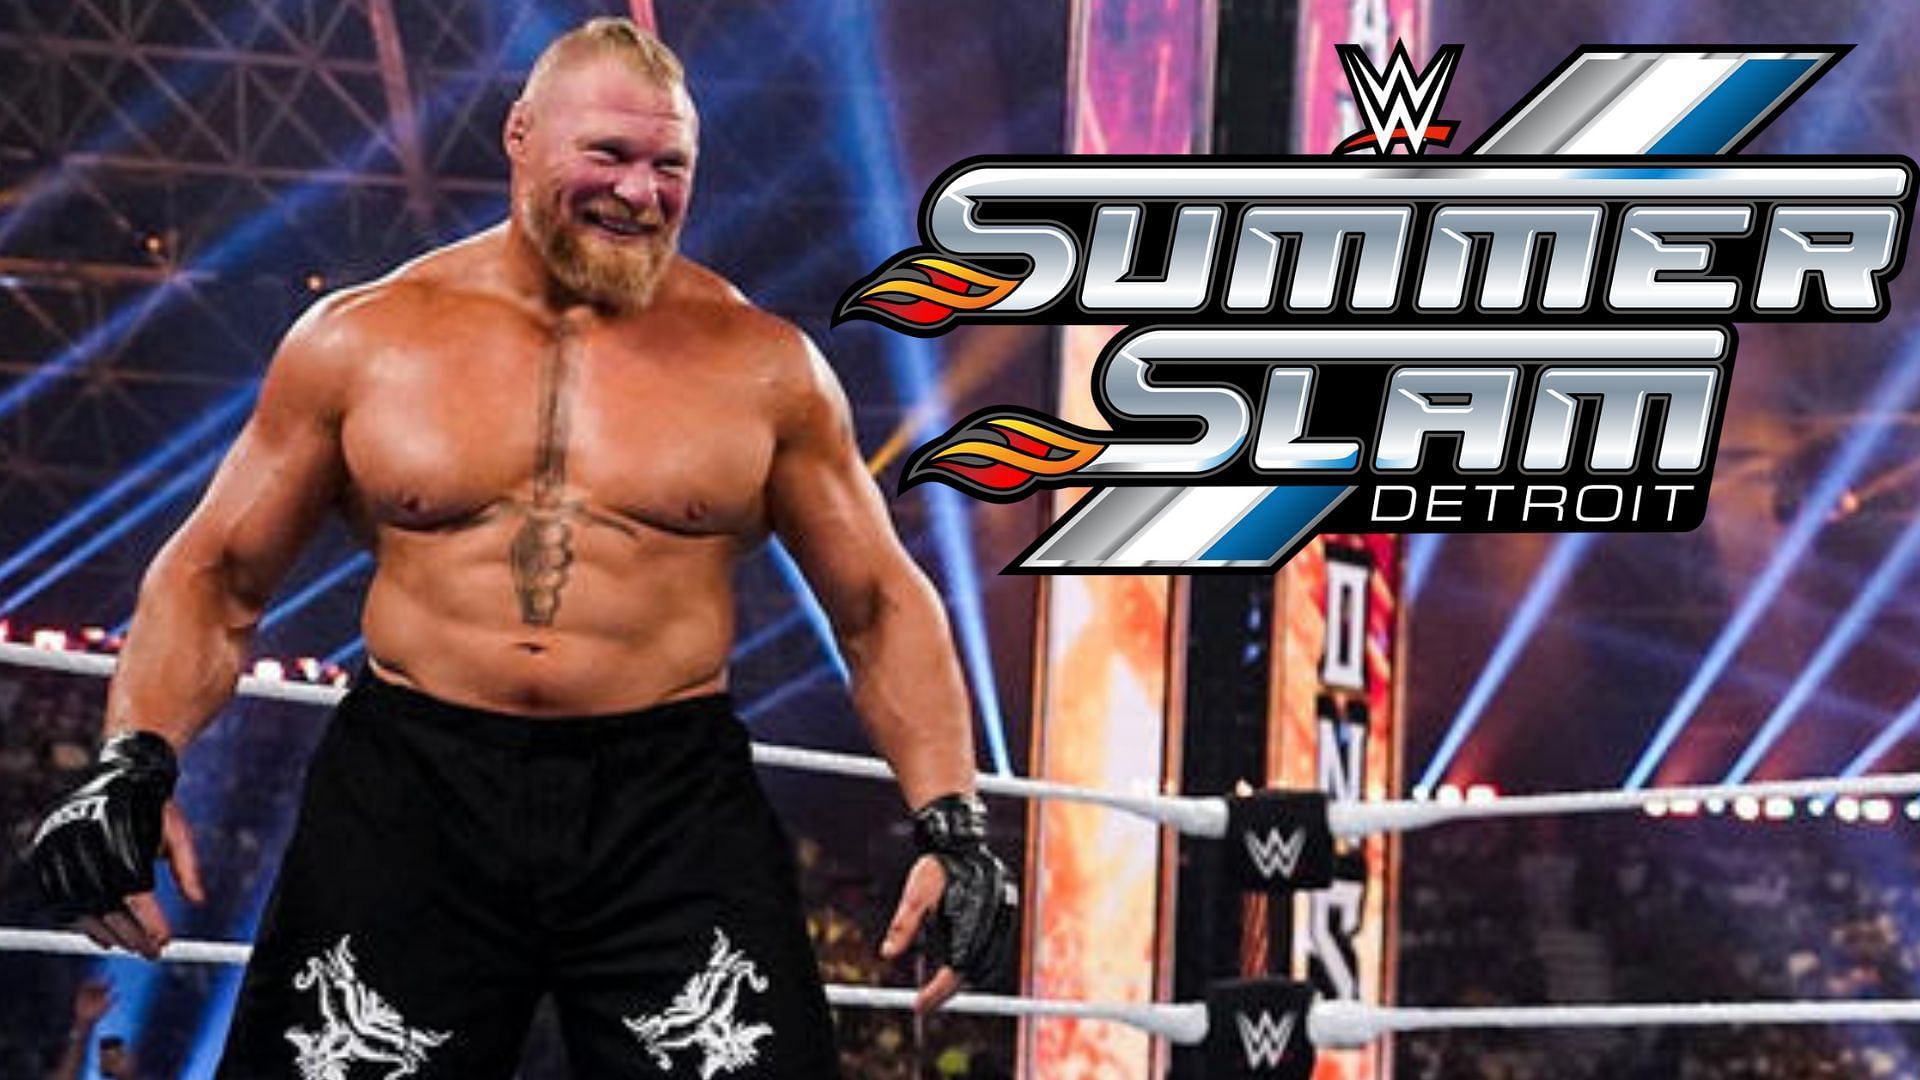 Will Brock Lesnar set his sights on the most dominant champion in WWE today?